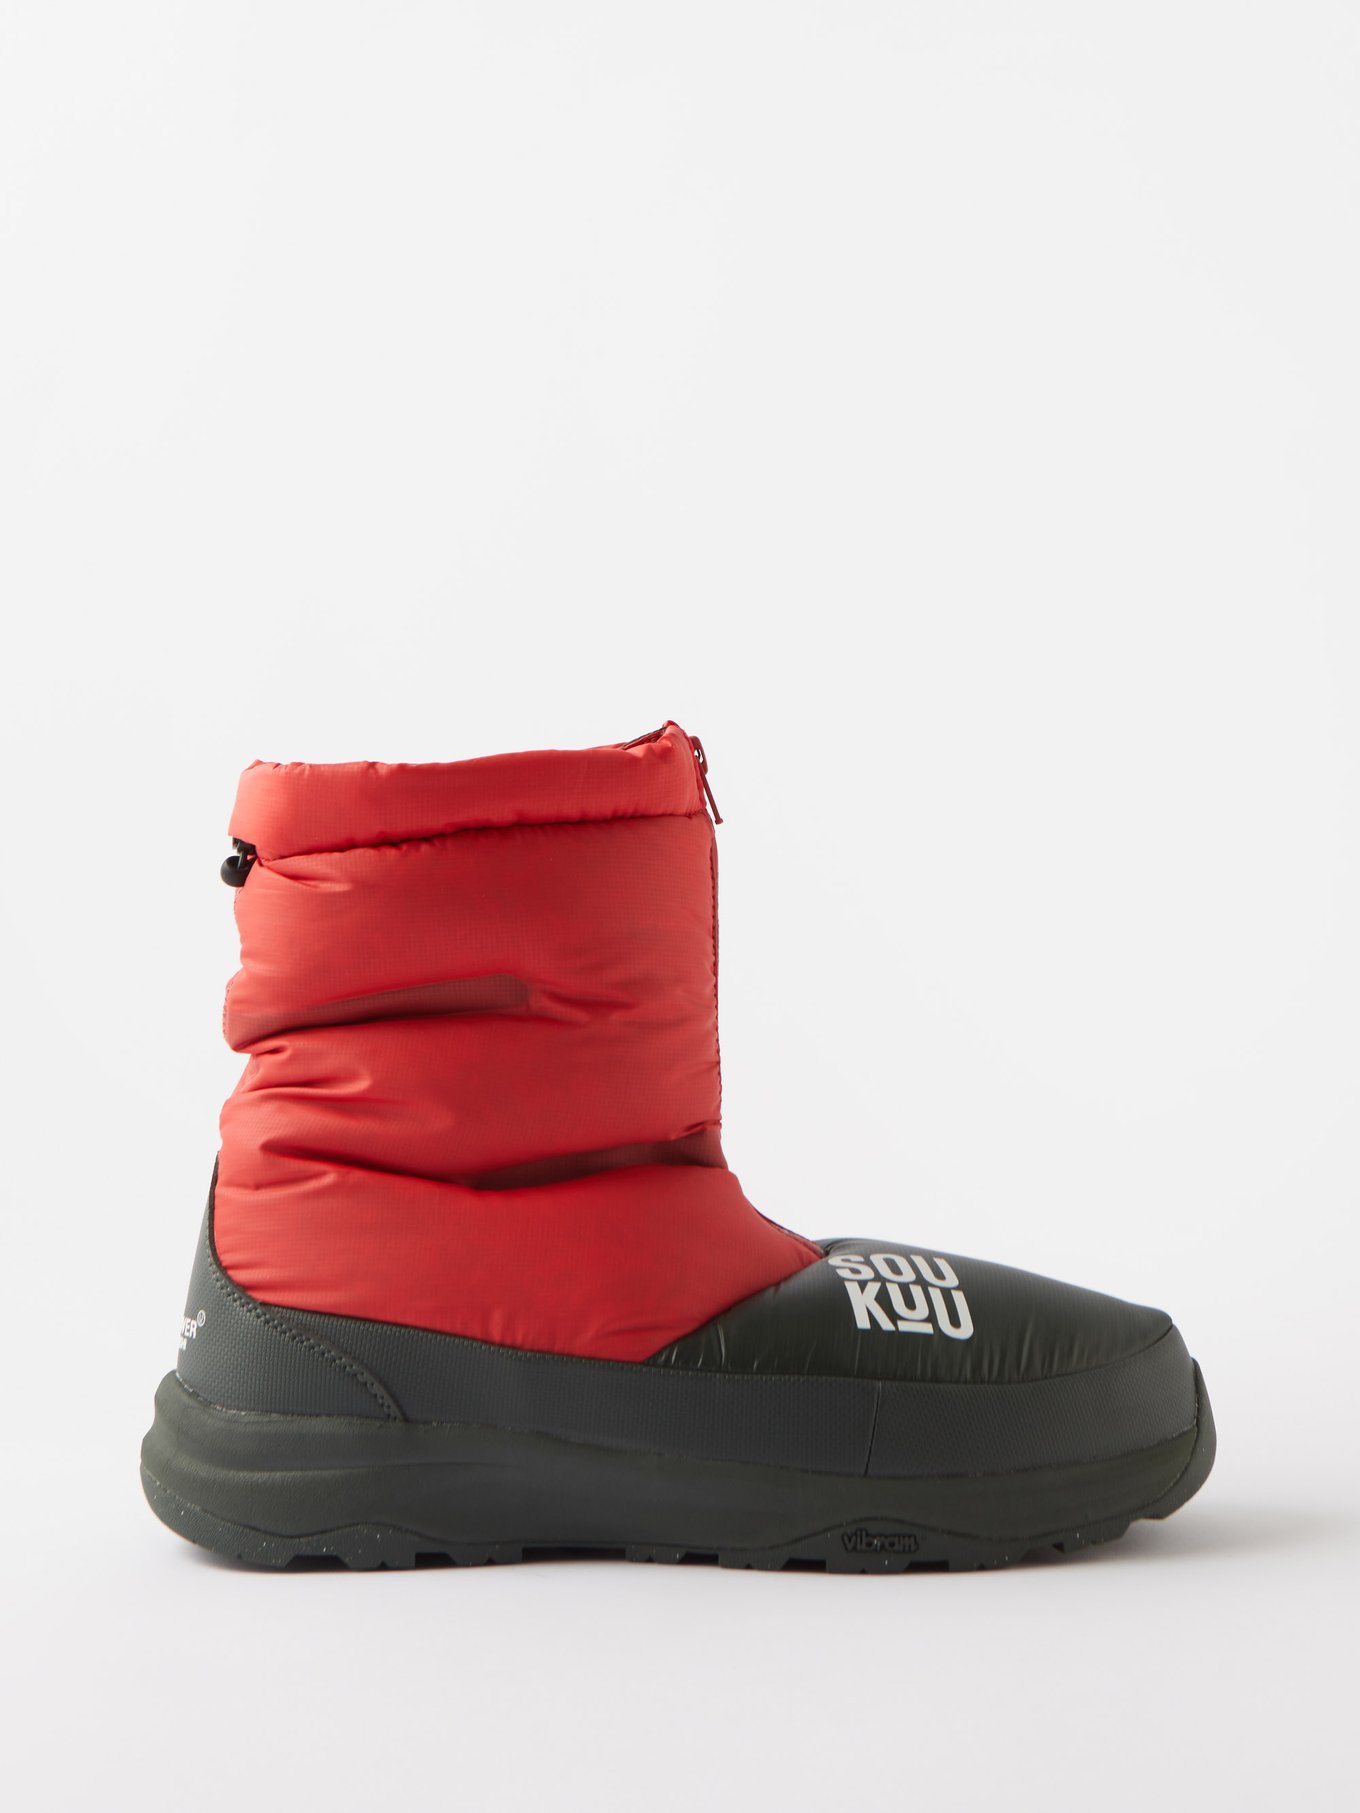 Soukuu padded ripstop boots | The North Face x Undercover